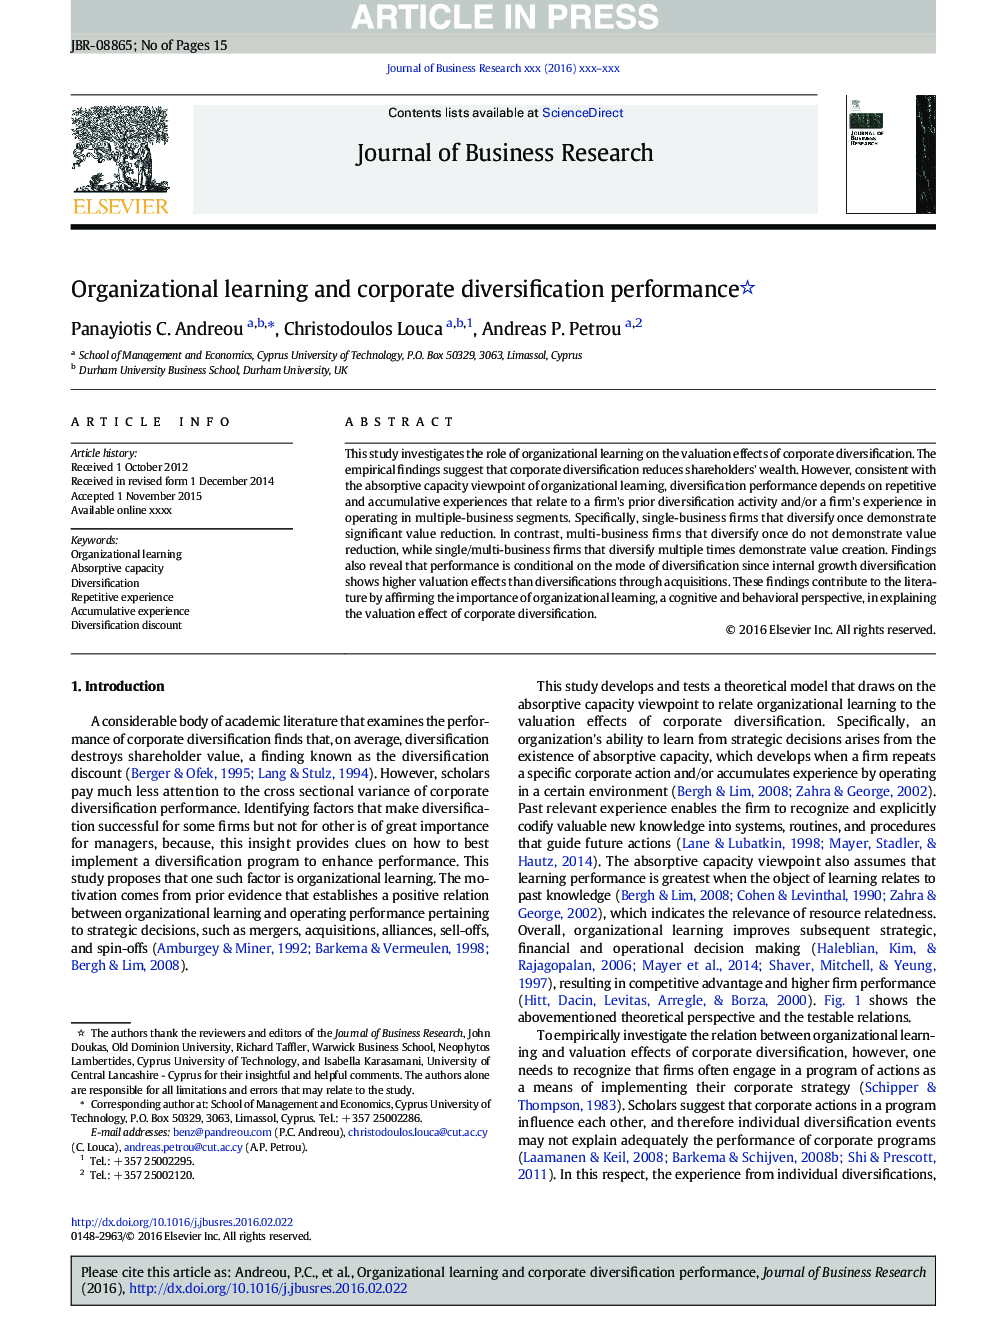 Organizational learning and corporate diversification performance